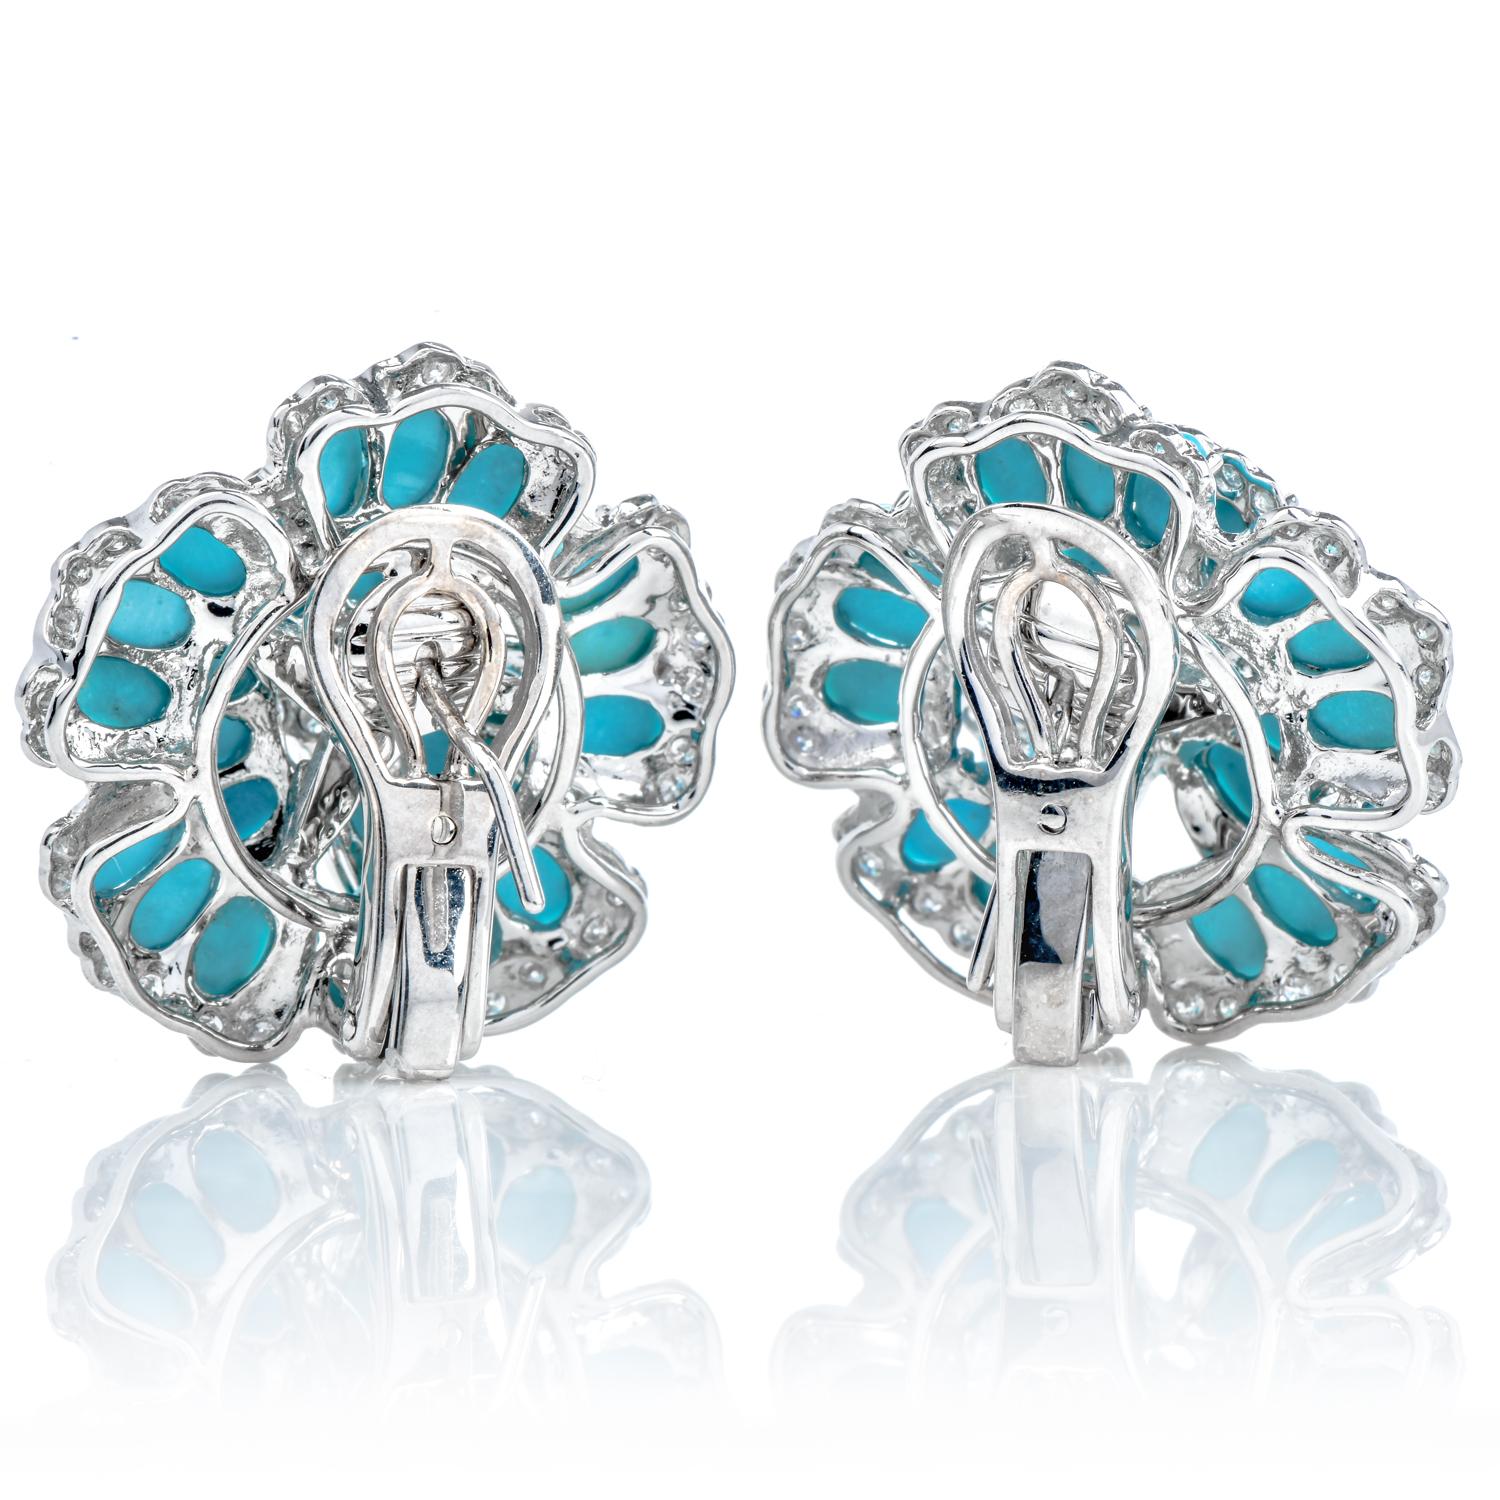 Inspired by the beauty of Blue hydrangea flowers, these romantic earrings have a subtle and elegant combination of color and sparkle.

Crafted in solid 18K White Gold.

Each flower is adorned in the center & petals by 126 round cut diamonds,